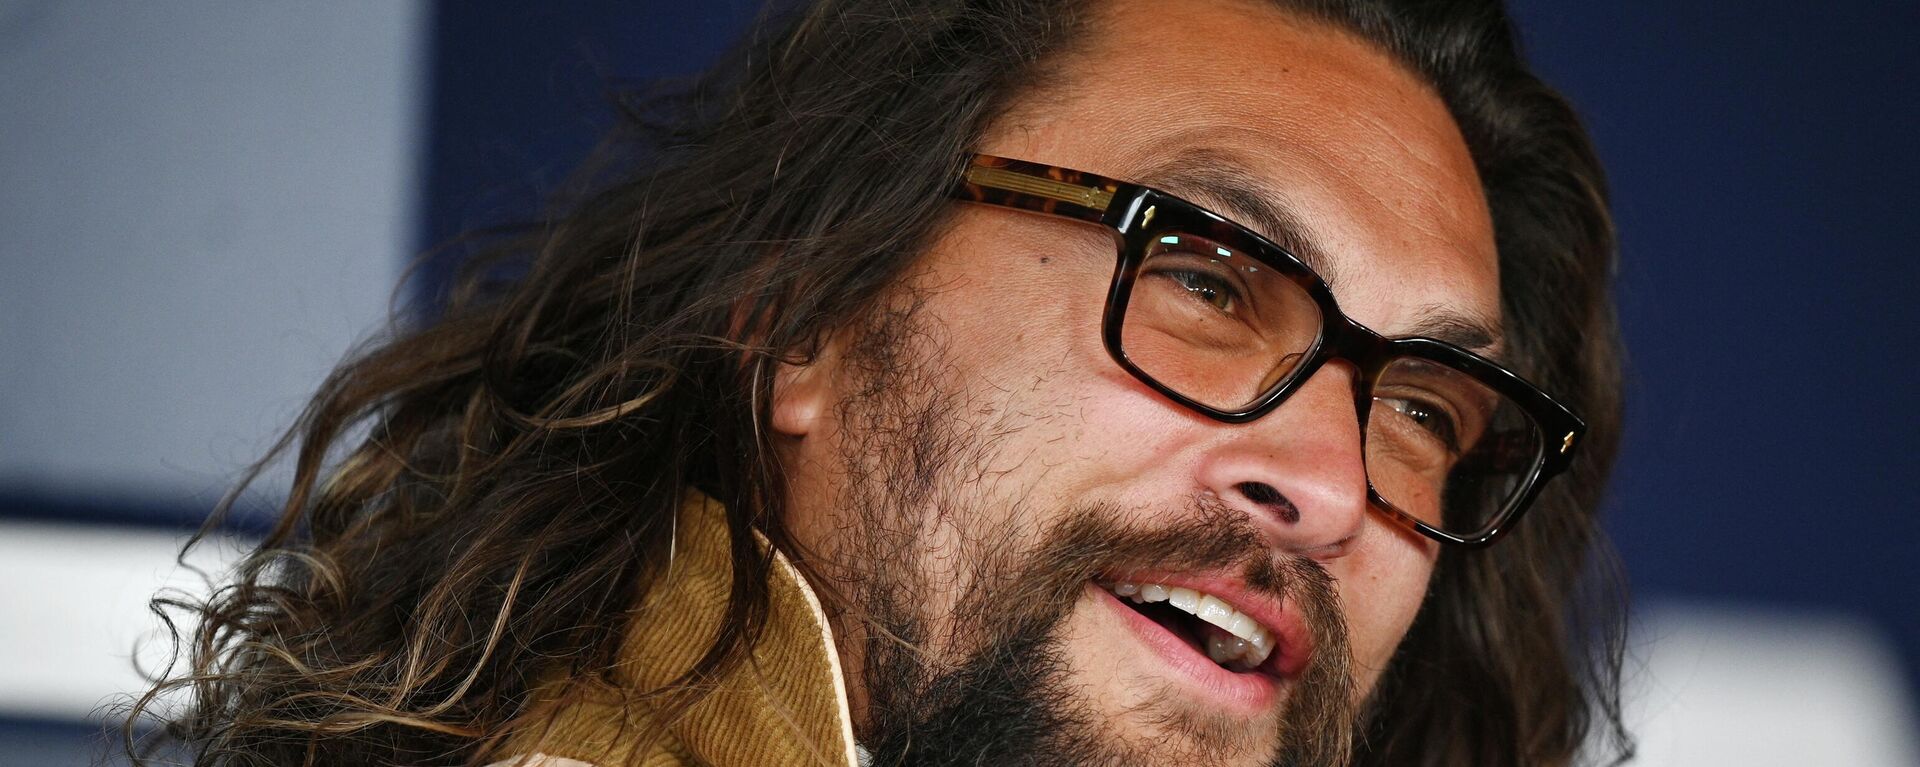 US actor Jason Momoa attends the premiere of Ambulance at the Academy Museum of Motion Pictures in Los Angeles, California, on April 4, 2022 - Sputnik International, 1920, 15.06.2022